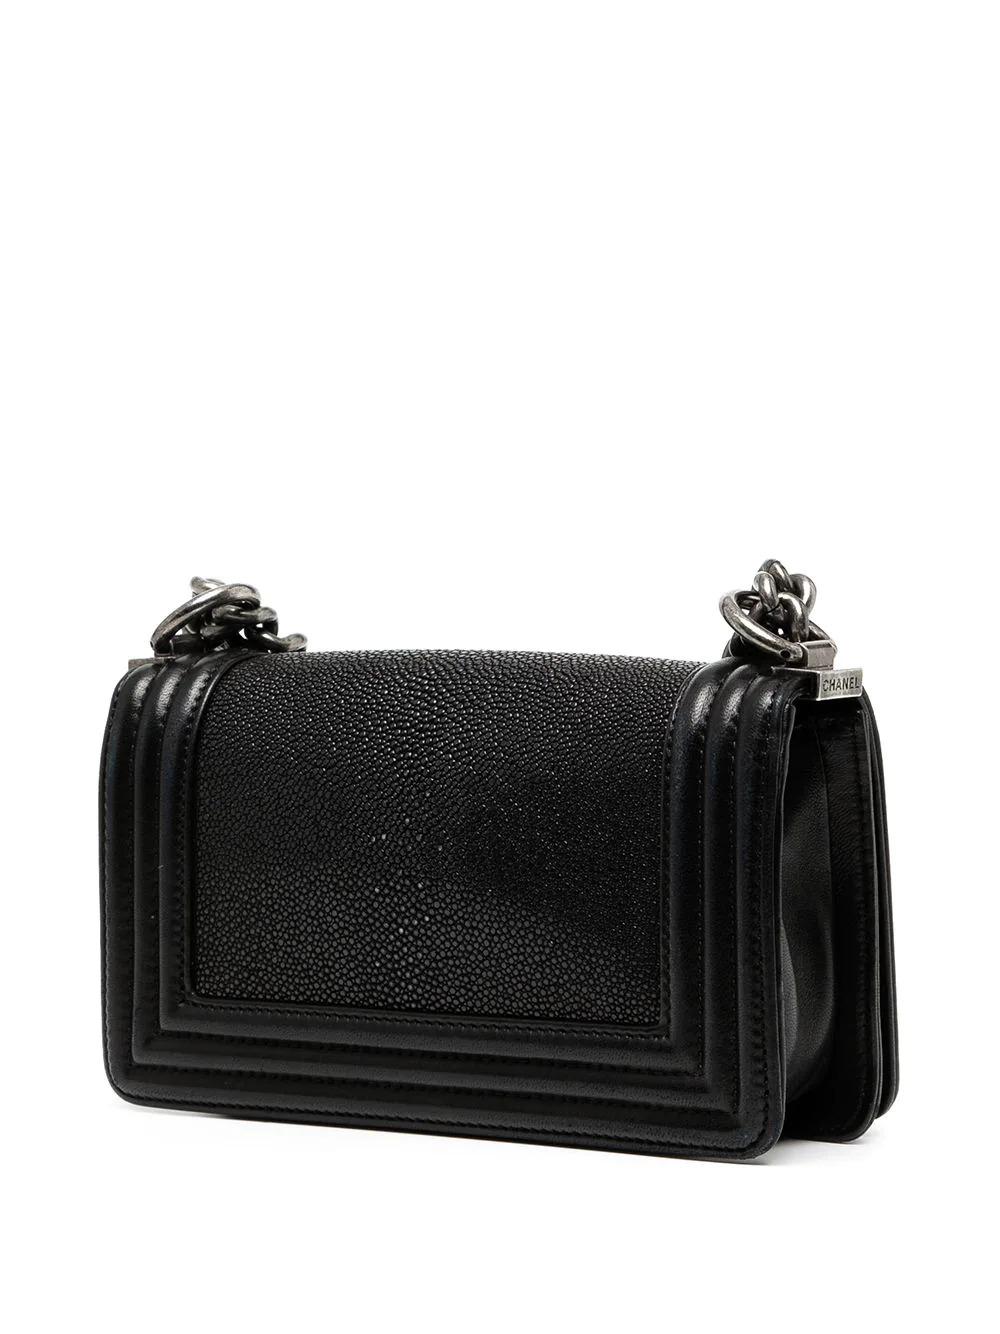 An iconic bag of the French fashion house, the Chanel Boy bag was originally inspired by a cartridge bag, made for hunters. Offering a more modern and edgy twist than the classic flap, this pre-owned bag from 2012 has been crafted from galuchat